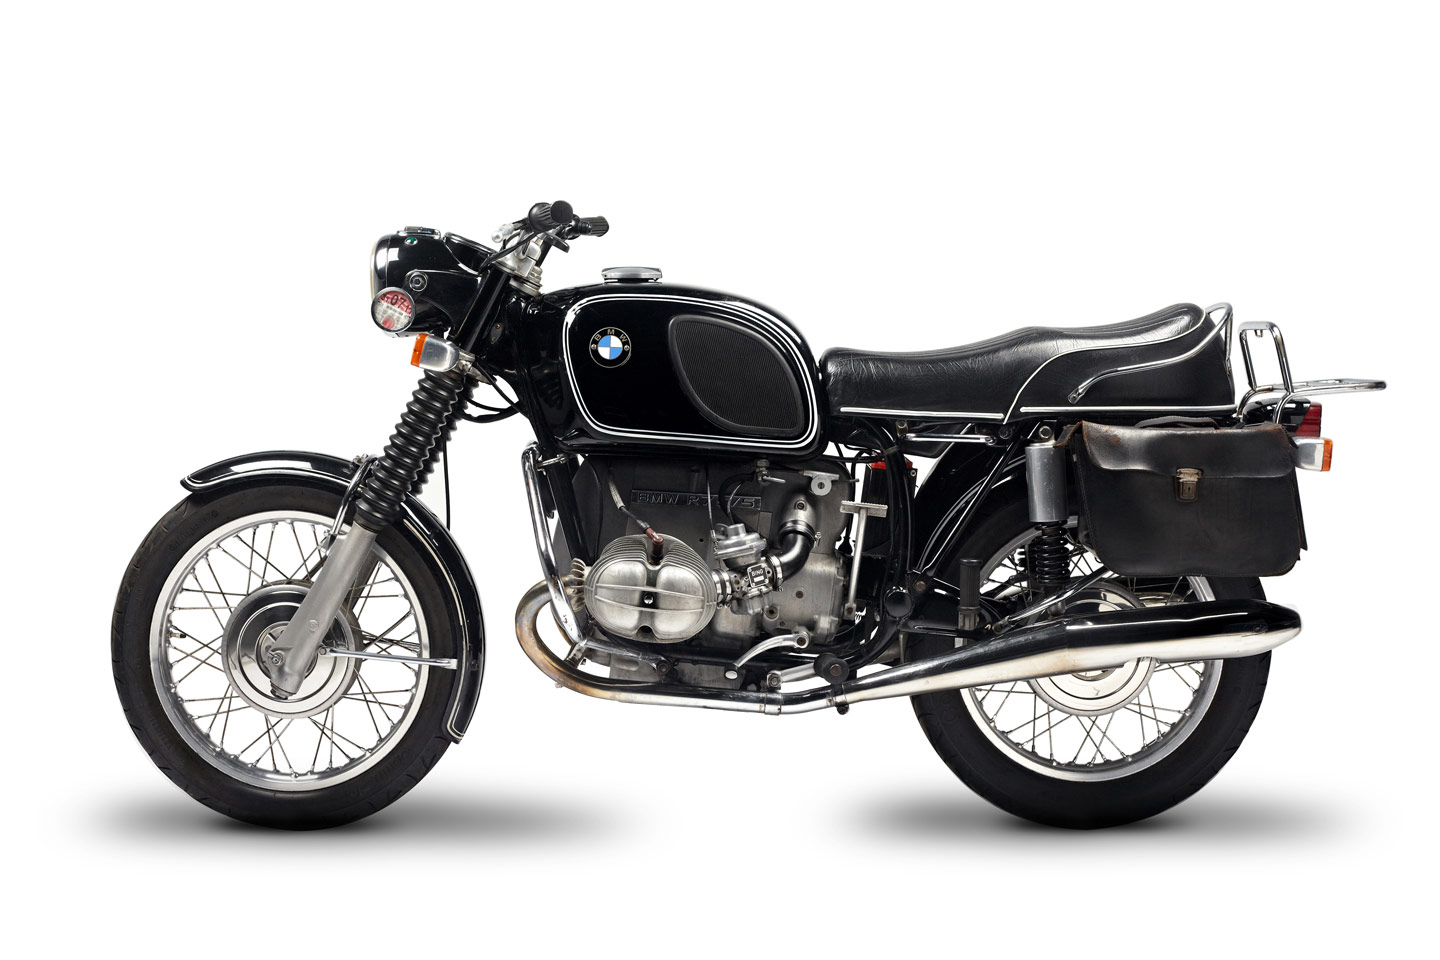 12 Greatest Bmw Motorrad Bikes Ever Motorcycle News Motorcycle Reviews From Malaysia Asia And The World Bikesrepublic Com